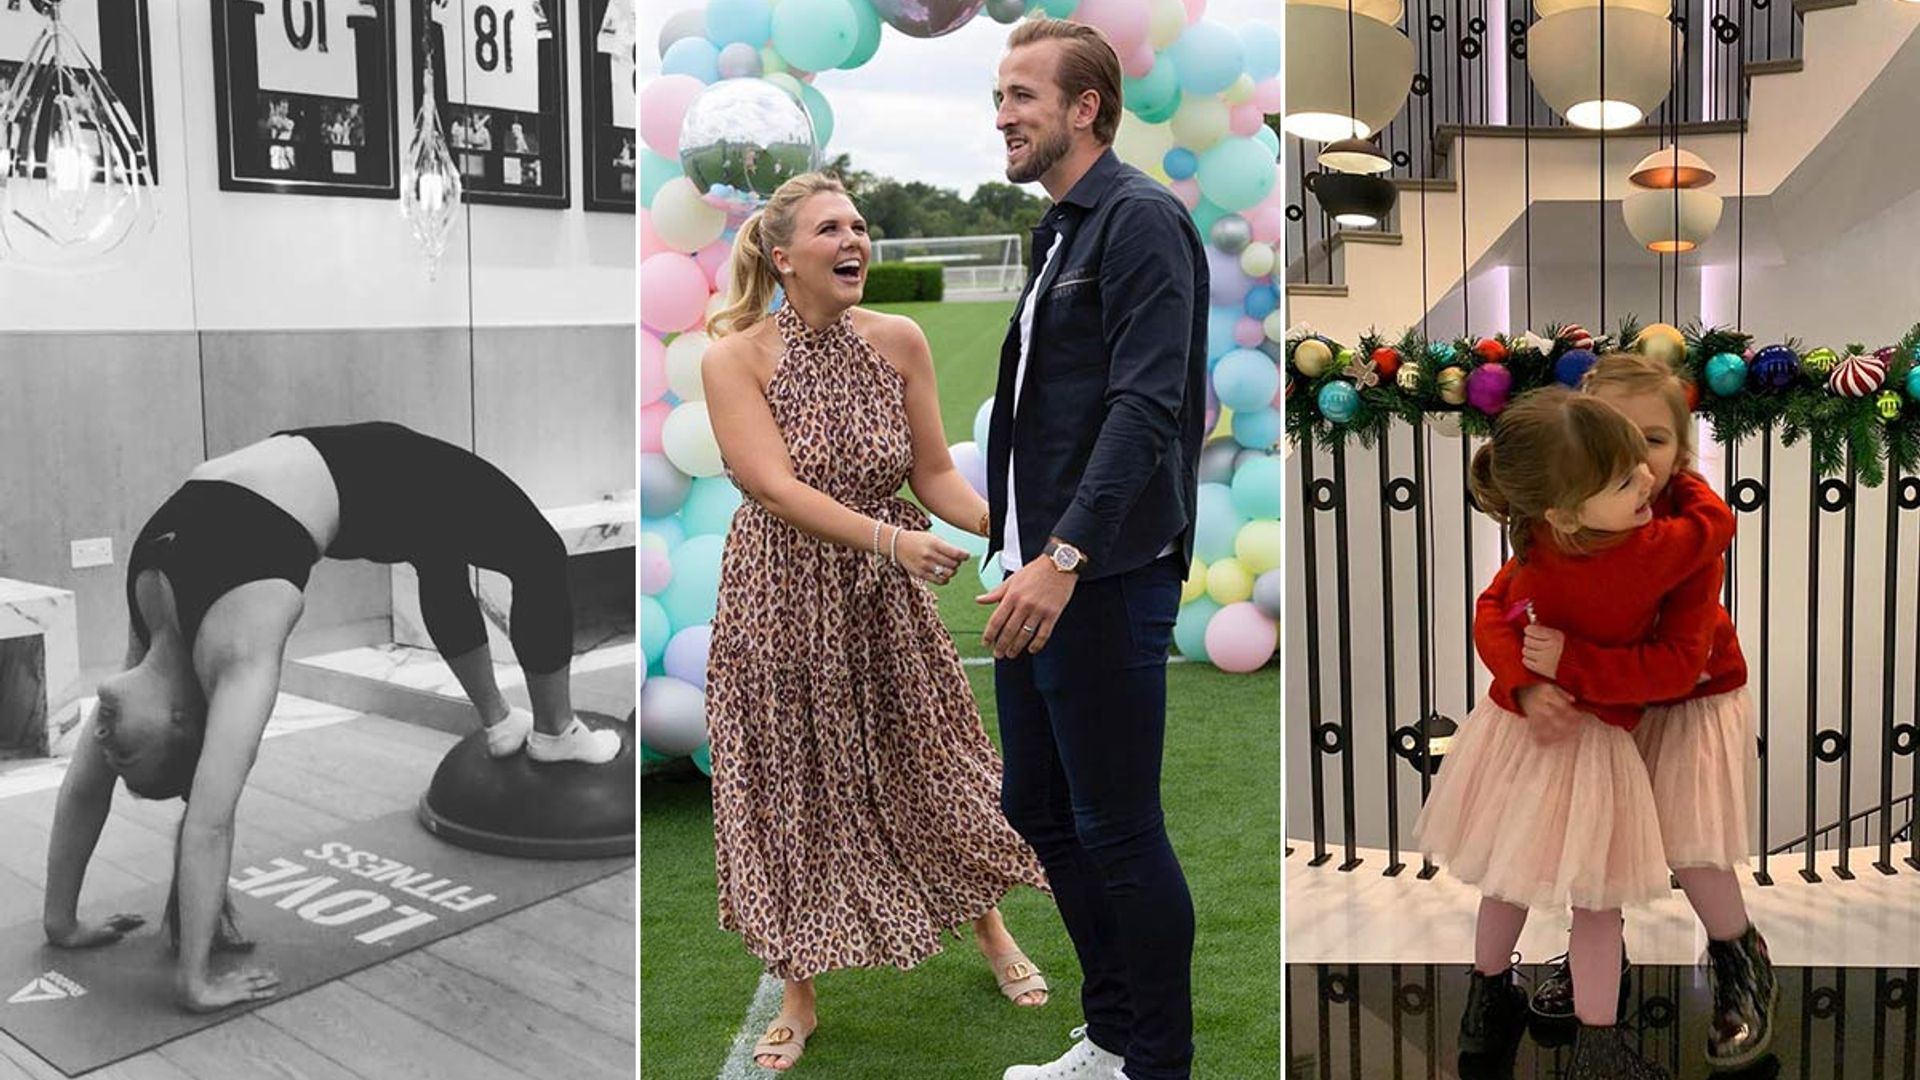 Harry Kane's £17million home with wife Katie is out of this world